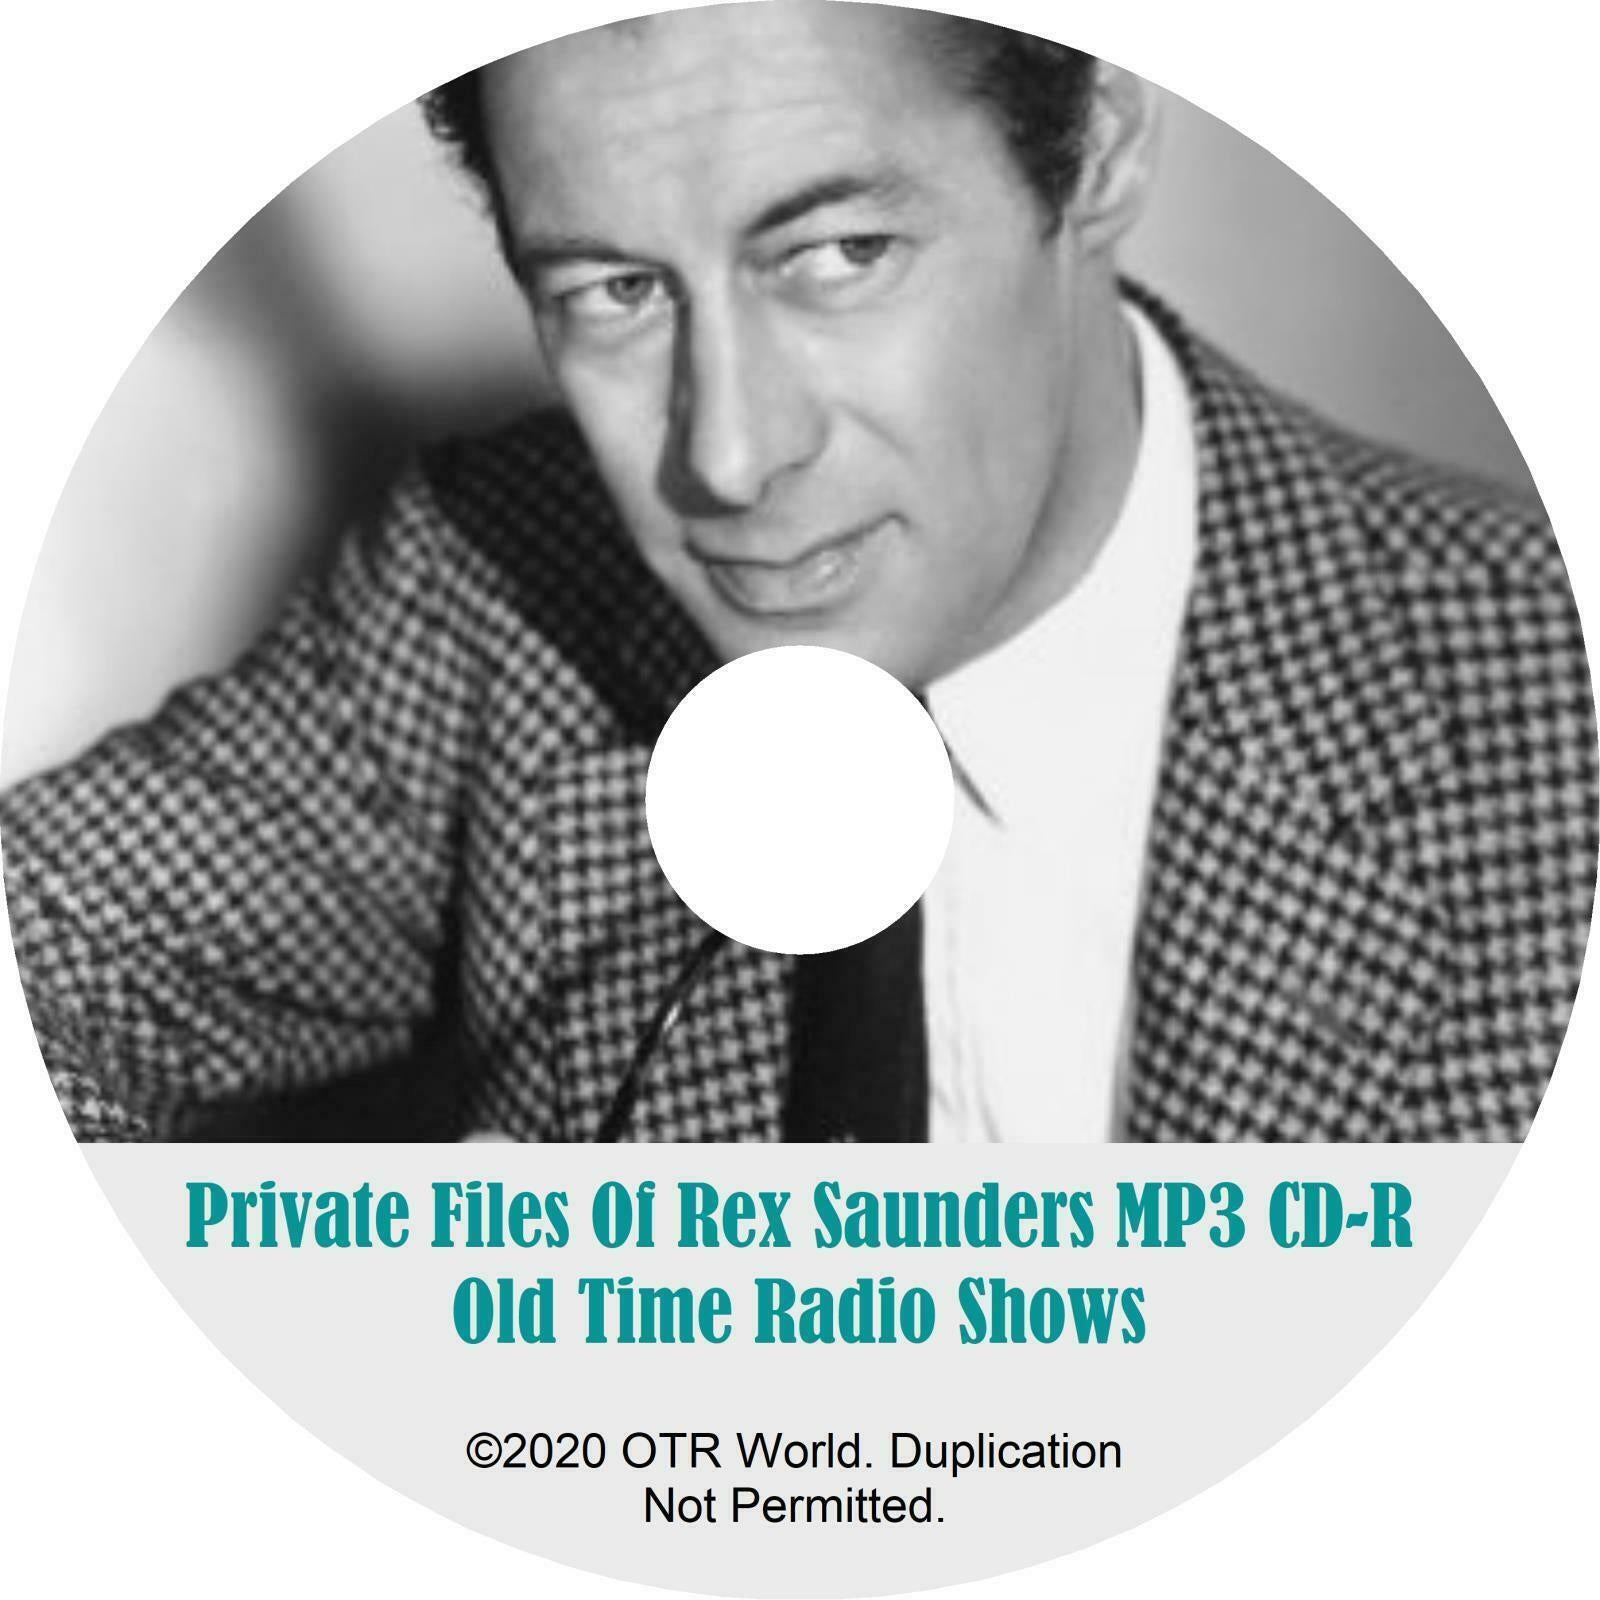 The Private Files of Rex Saunders OTR Old Time Radio Shows MP3 On CD 16 Episodes